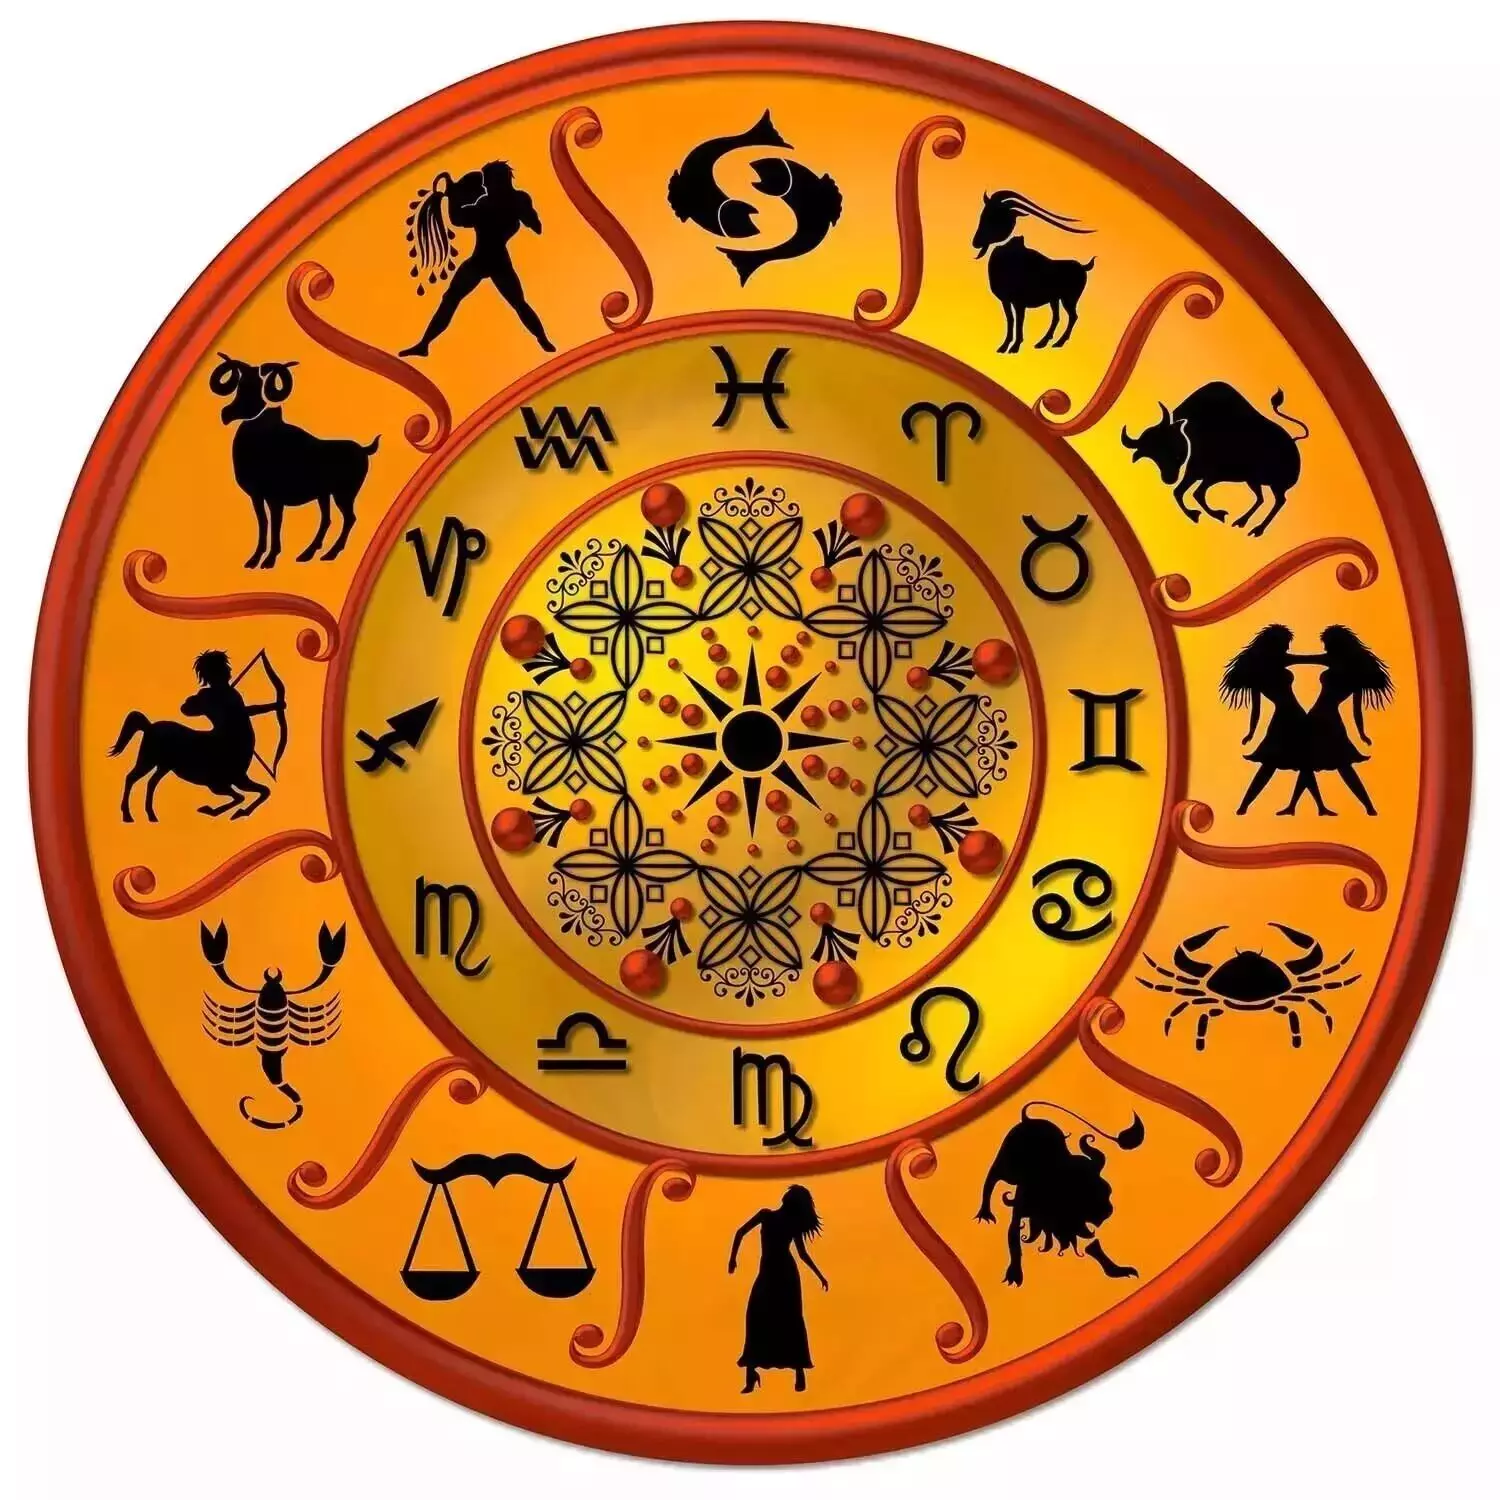 02 March  – Know your todays horoscope